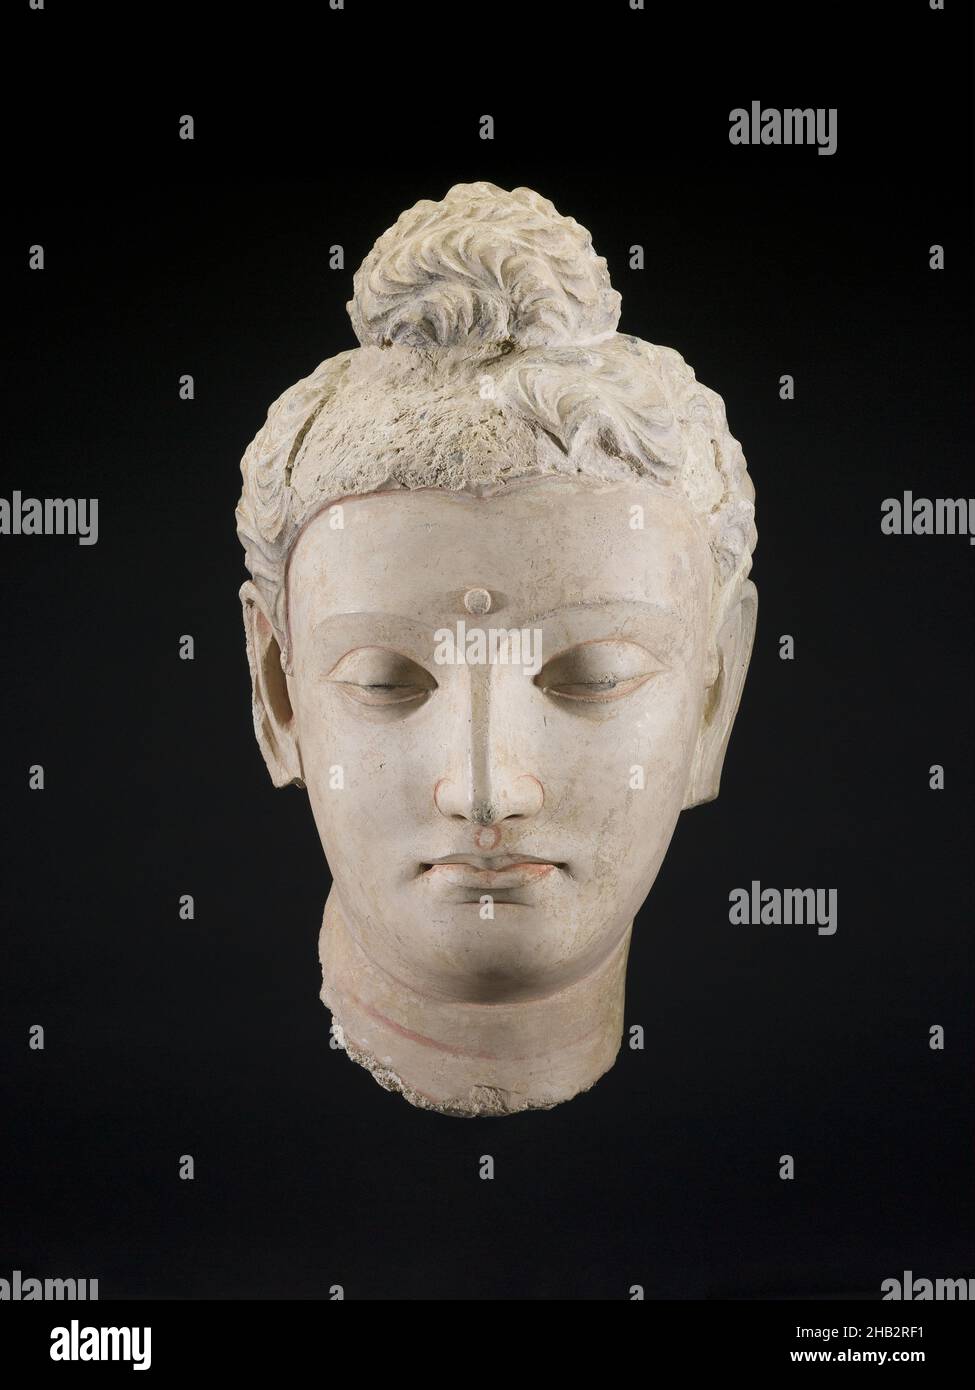 Head of a Buddha, Gandhāran, probably Kidarite dynasty, 3rd–5th century, 4th century, Stucco with traces of pigment, Hadda, Punjab province, Pakistan, Asia, Sculpture, stone & mineral, 18 x 11 1/2 x 10 1/2 in. (45.7 x 29.2 x 26.7 cm Stock Photo